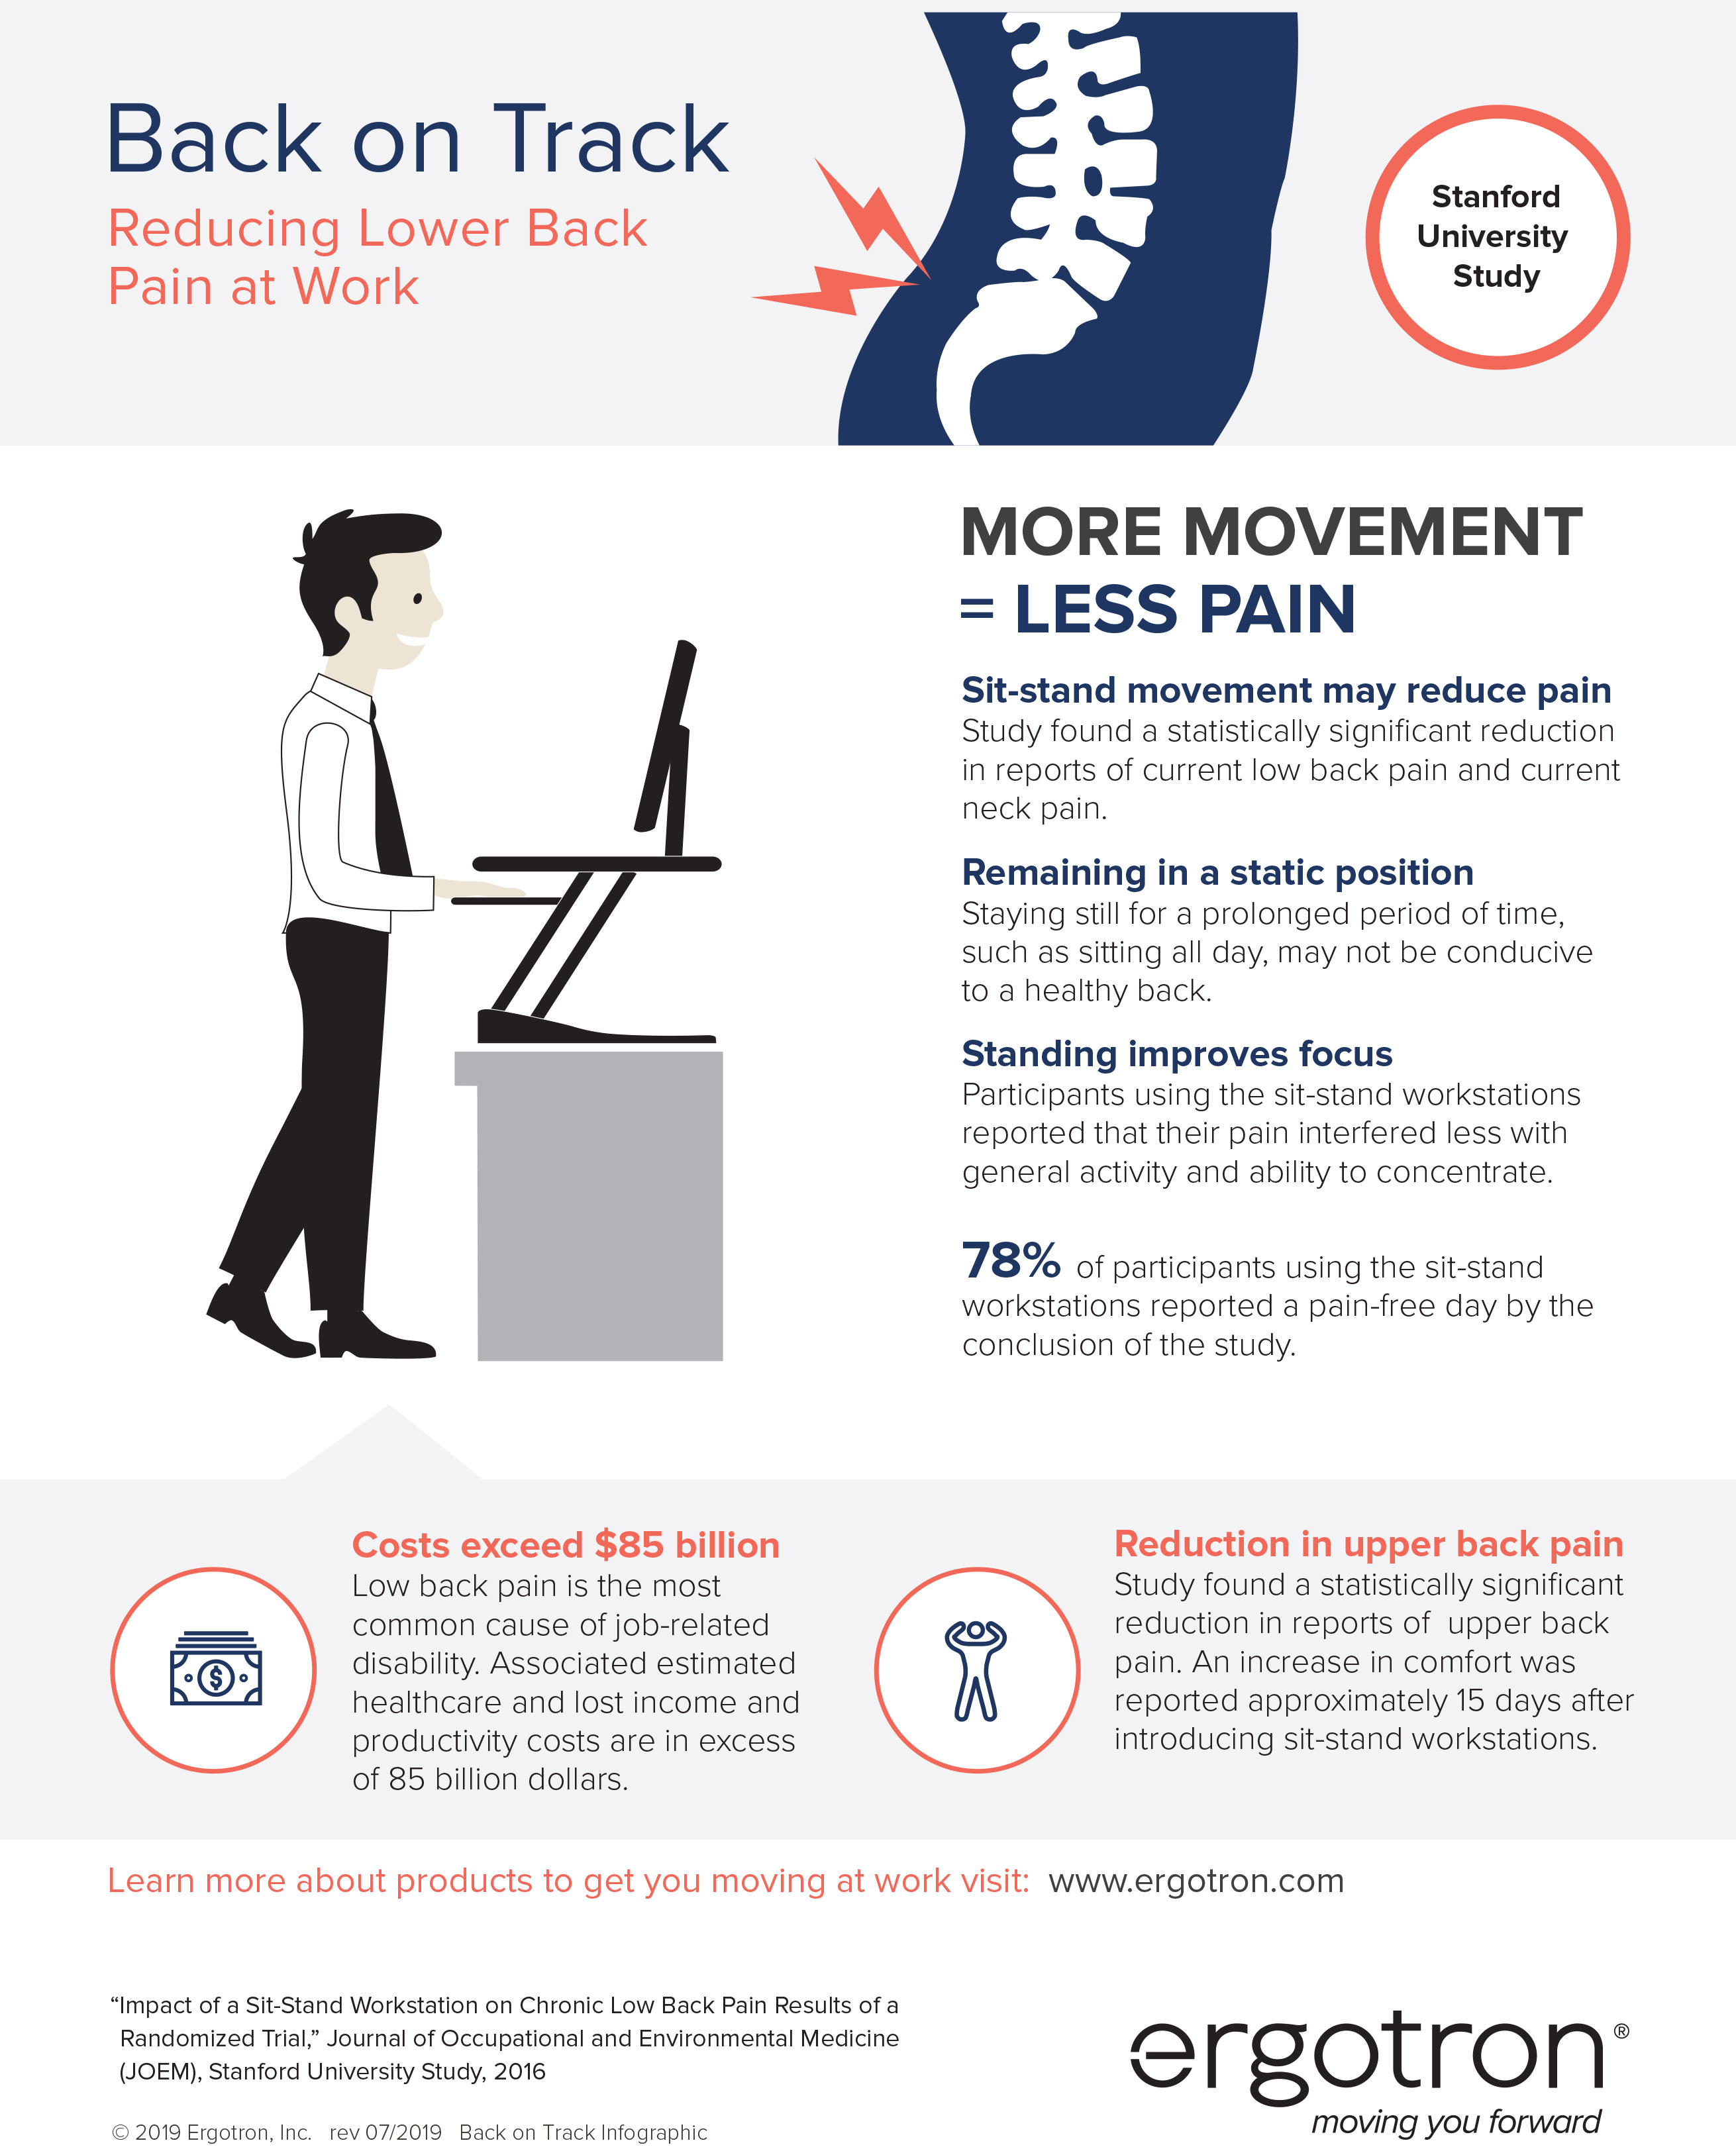 Reducing Lower Back Pain infographic